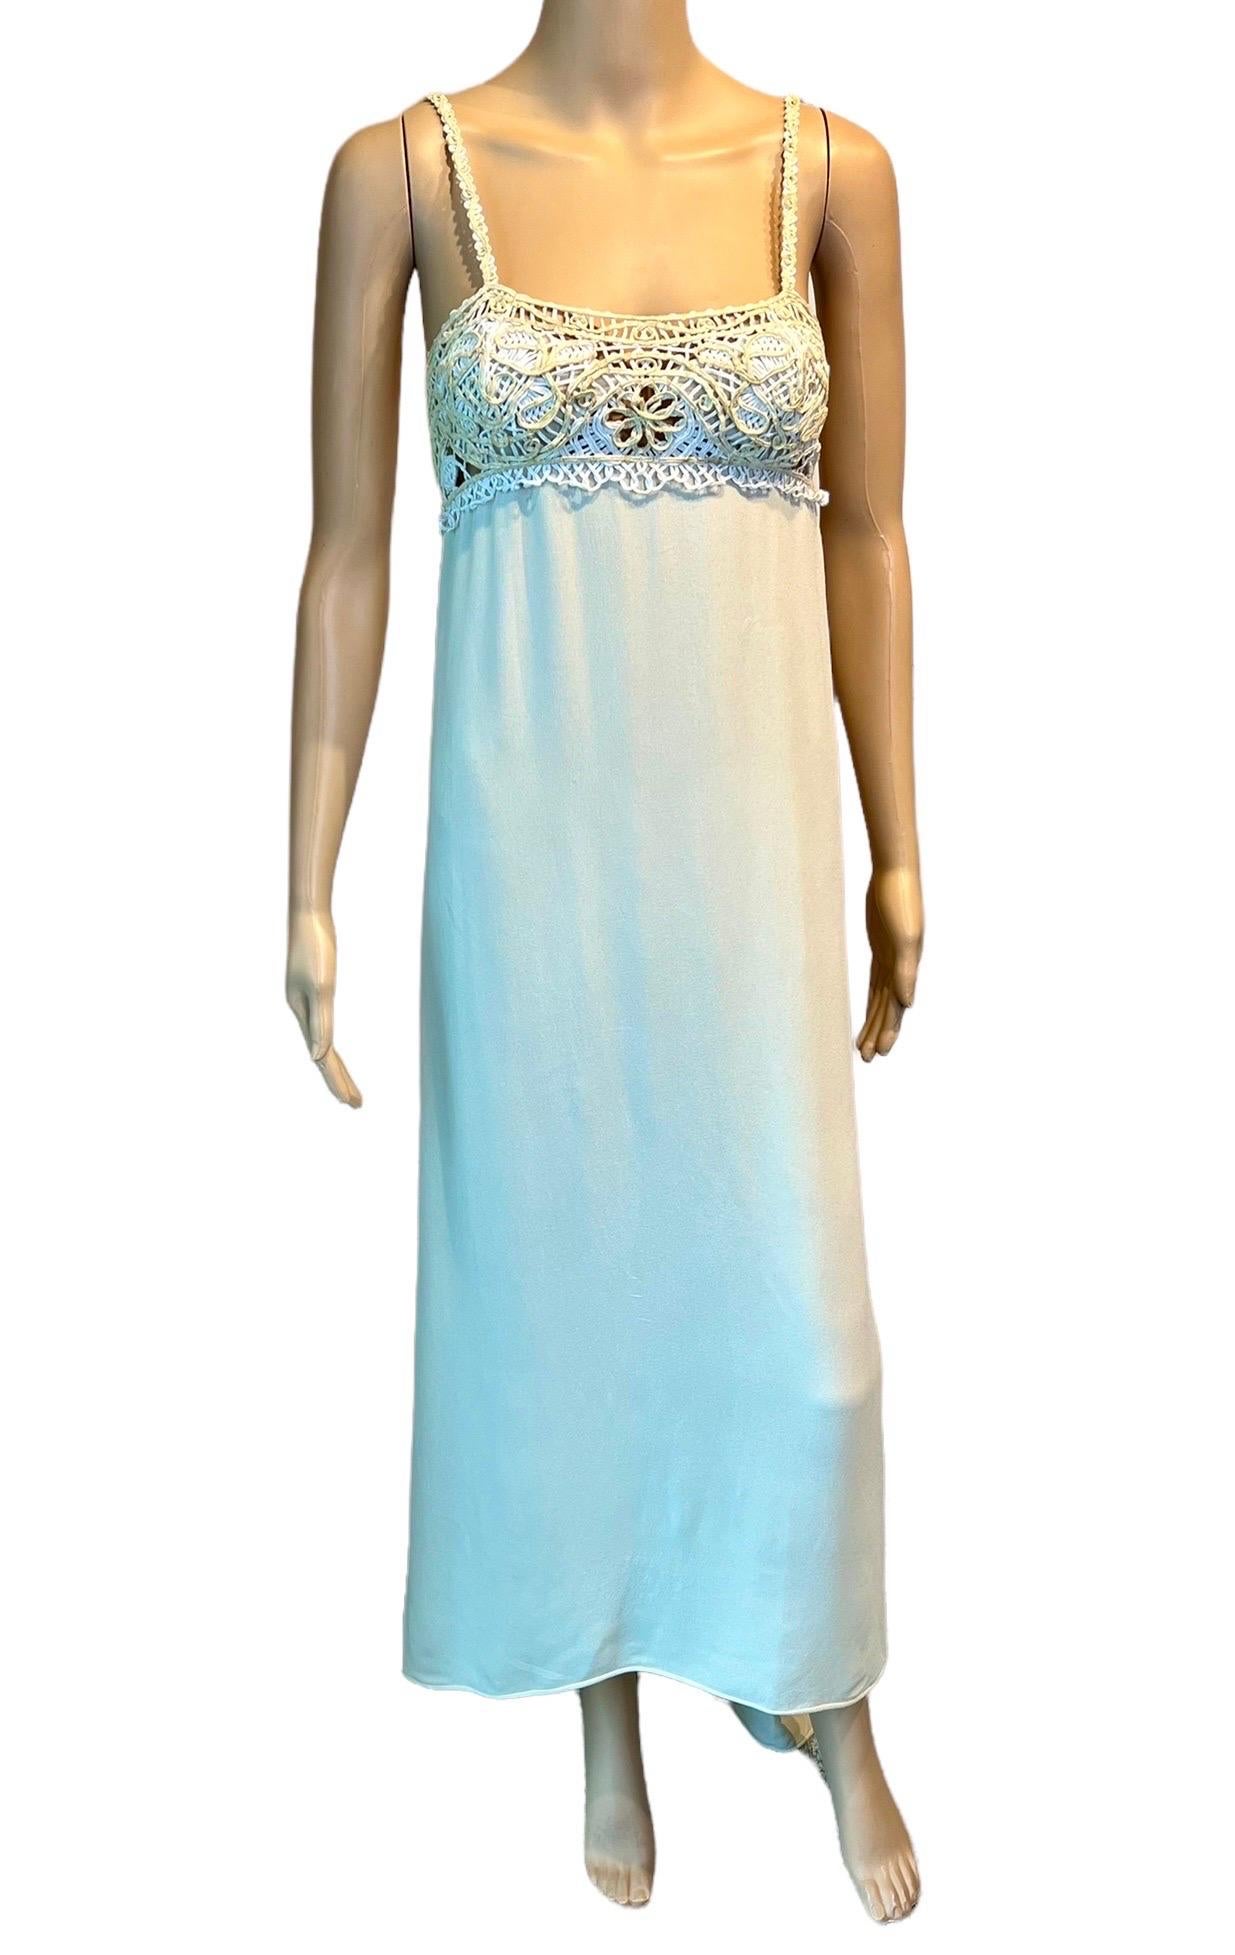 Gianni Versace S/S 1997 Runway Embroidered Lace Ivory Evening Dress Gown  For Sale 1